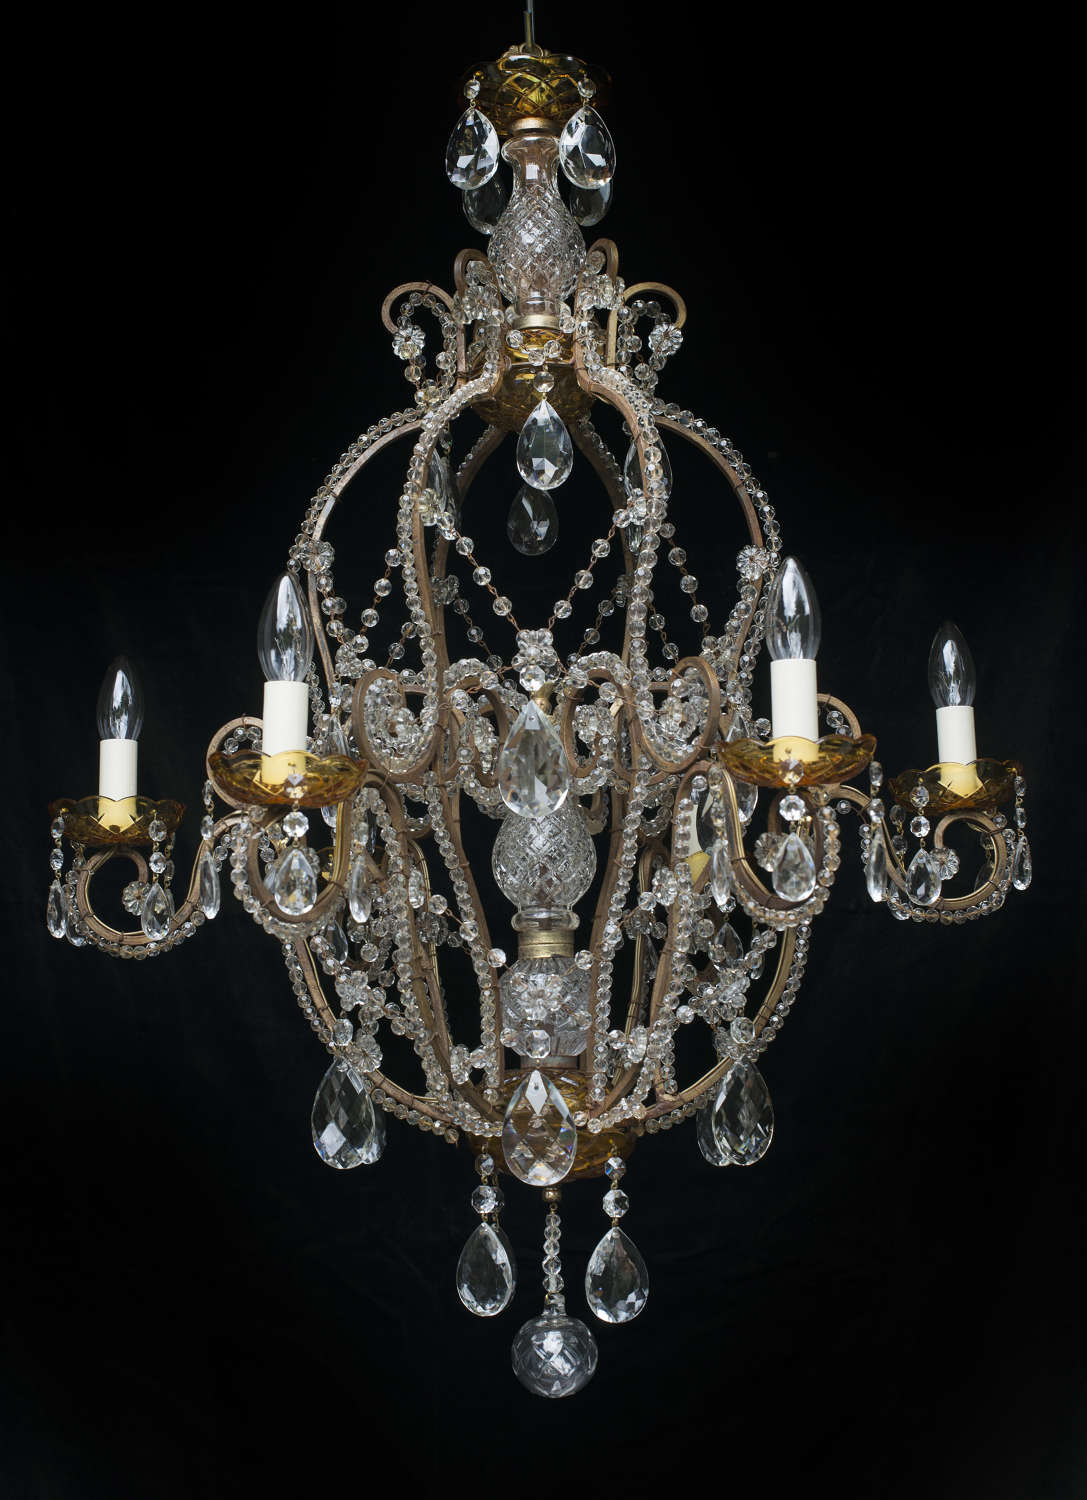 Large 6 light Italian Antique Chandelier with amber bobeche